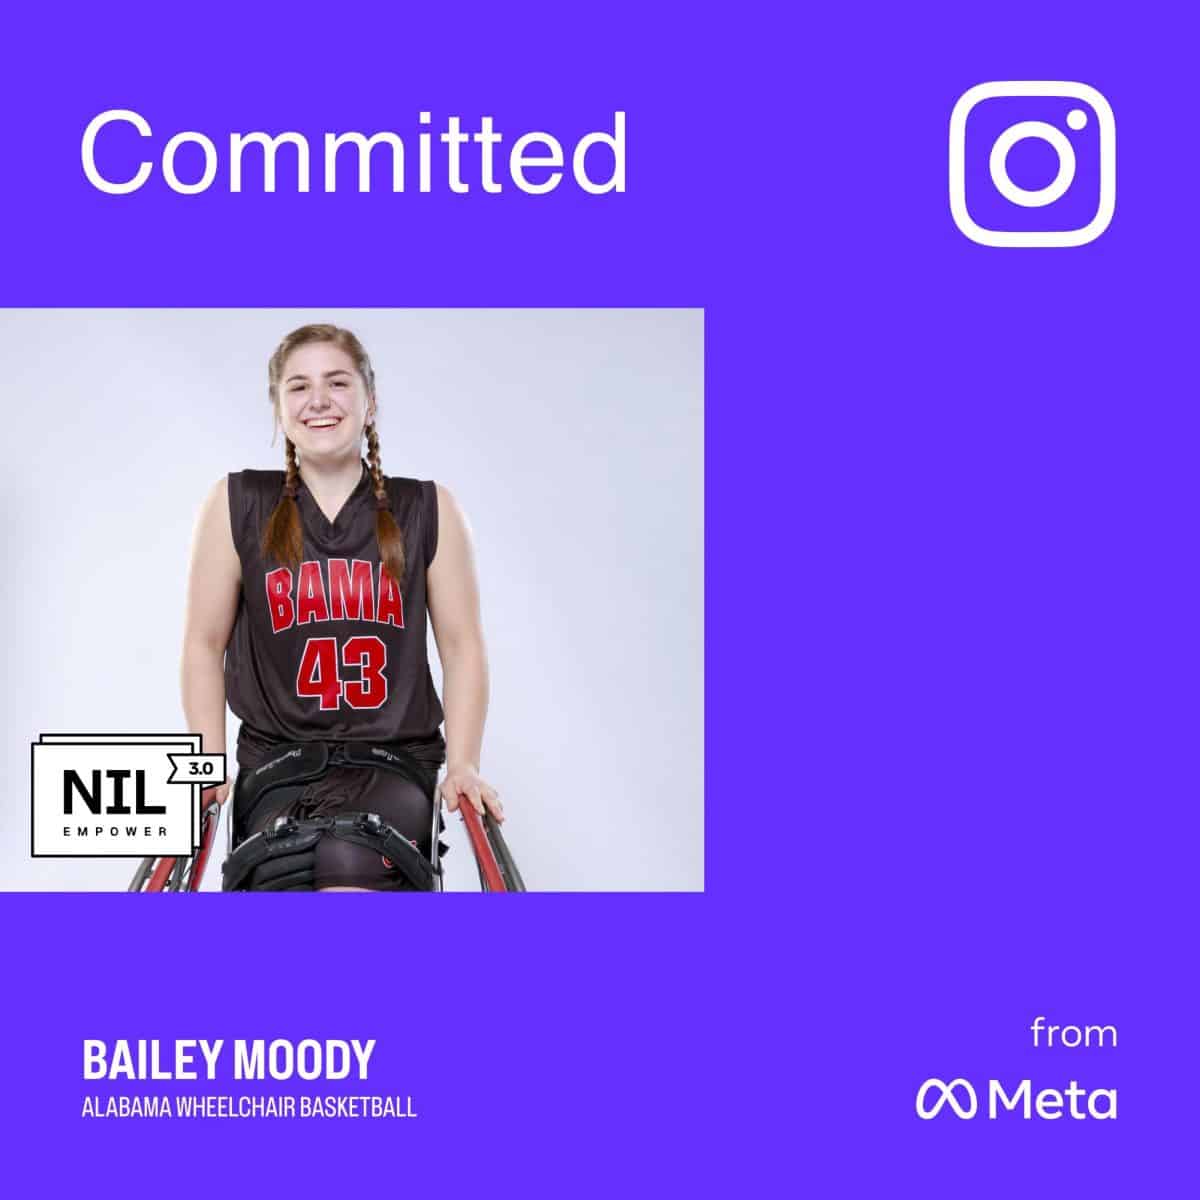 Bailey Moody announcement post for her partnership with Meta’s NIL Empower 3.0 program.